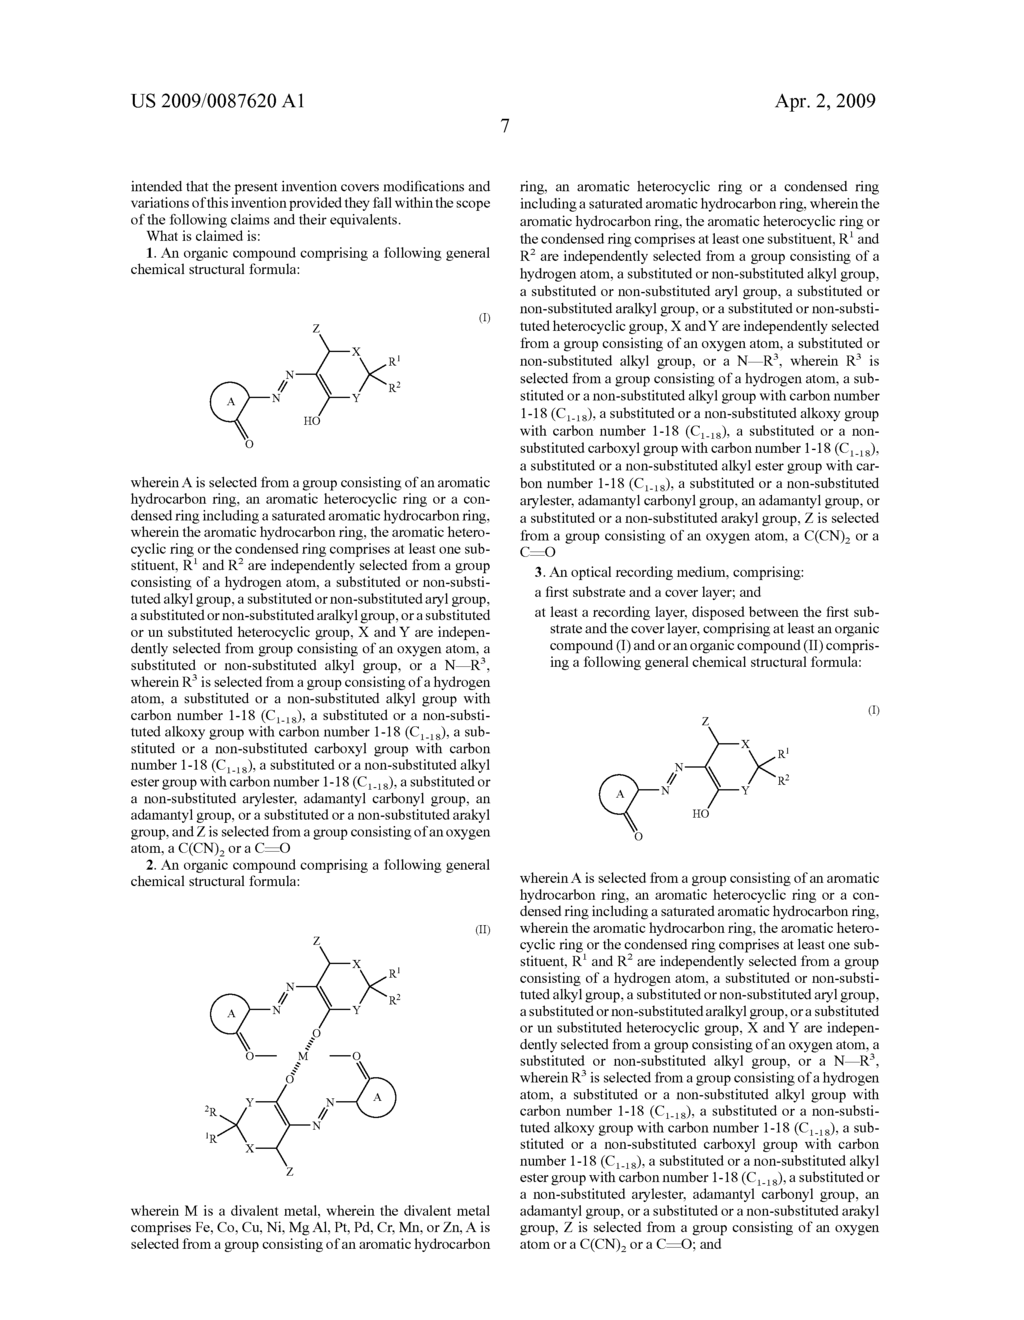 ORGANIC COMPOUNDS FOR RECORDING LAYER FOR RECORDING OF INFORMATION AND OPTICAL RECORDING MEDIUM INCLUDING THE SAME - diagram, schematic, and image 10